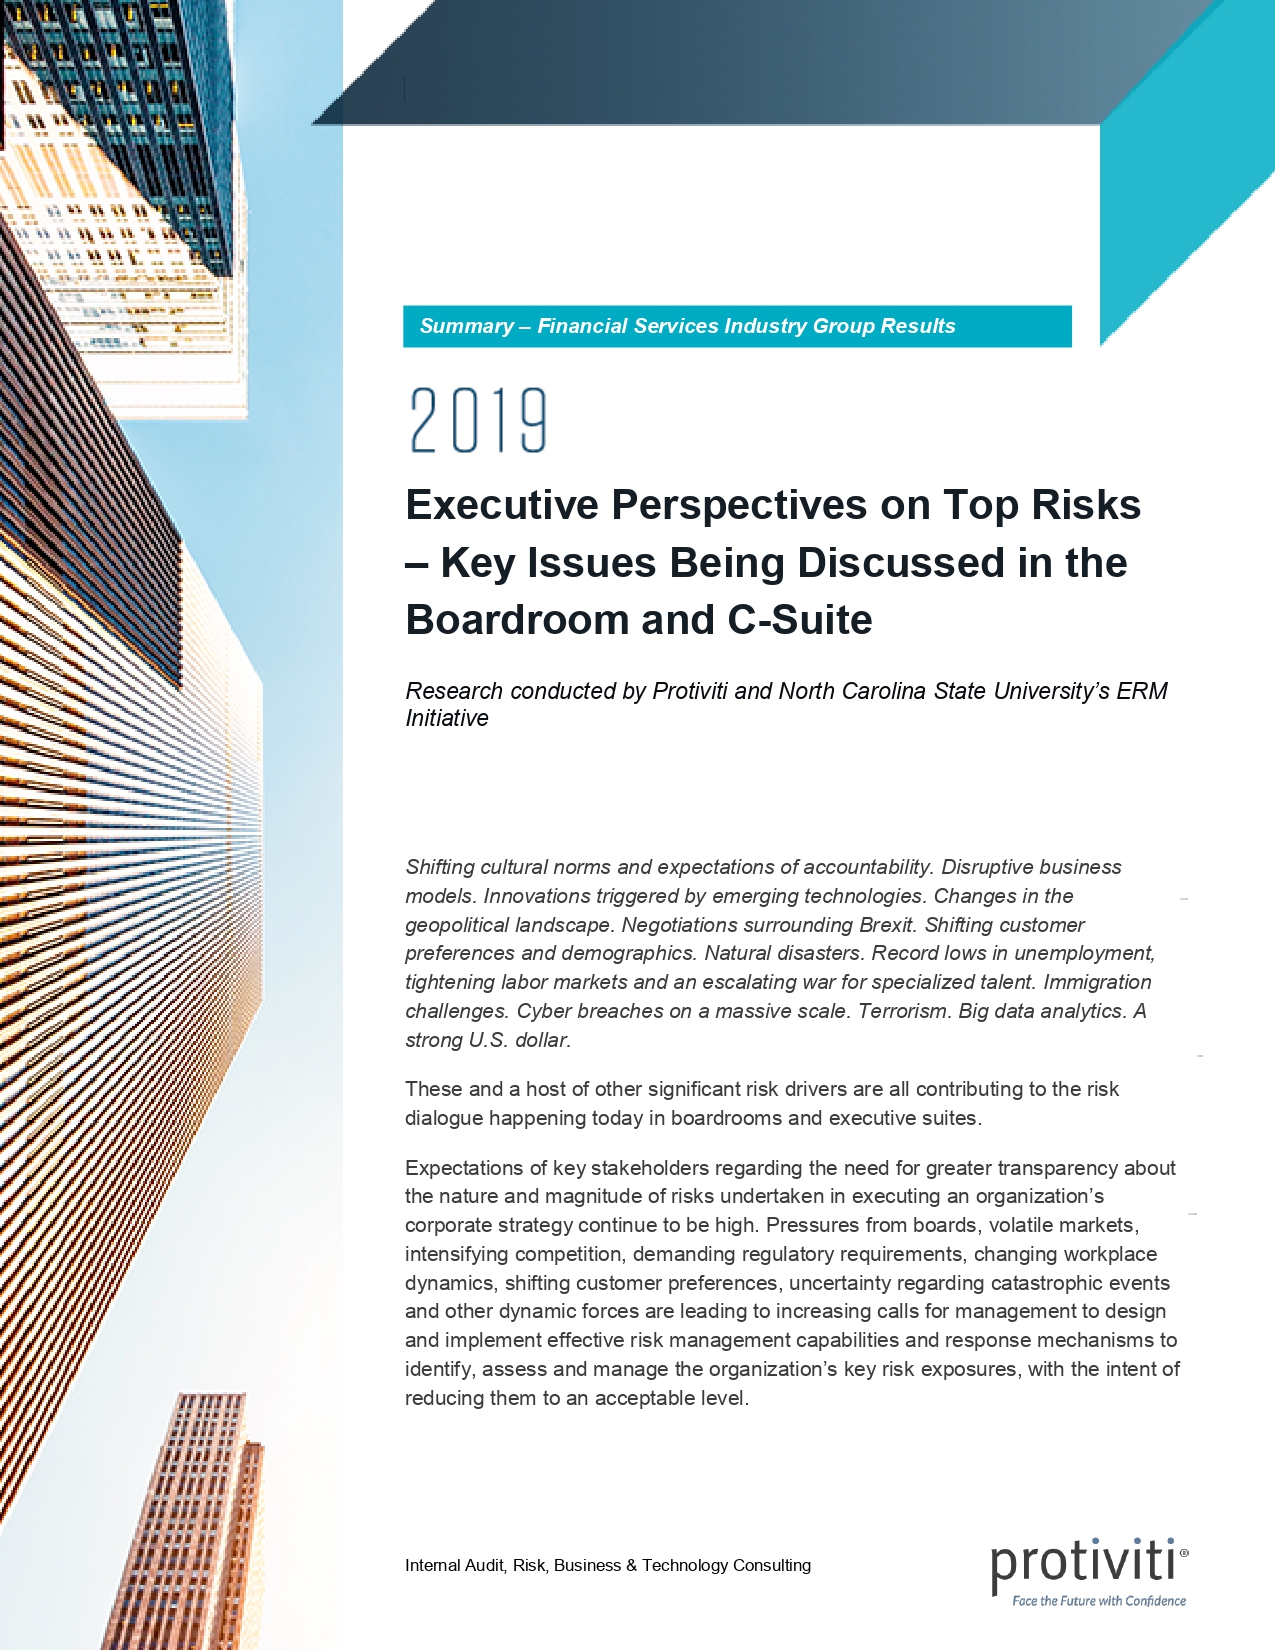 Screenshot of the first page of Executive Perspectives on Top Risks in 2019 - Financial Services Industry Group Results